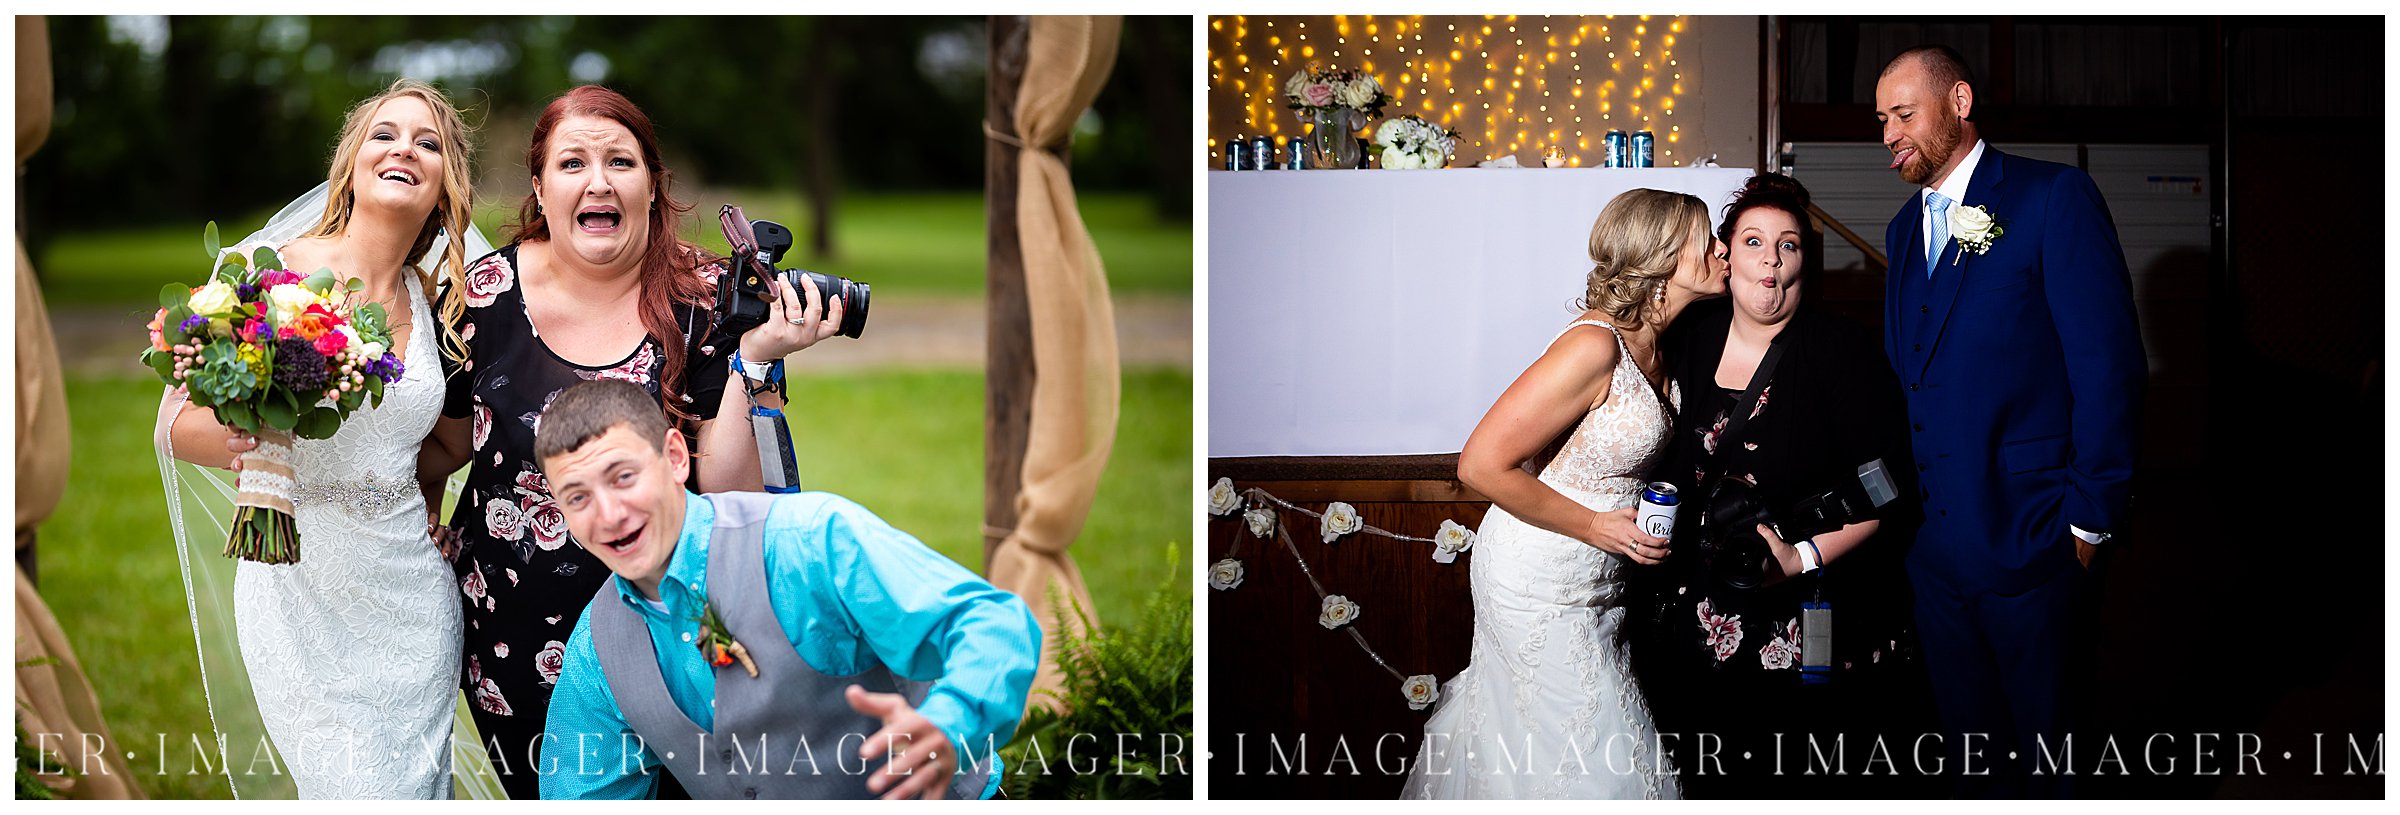 Mager Image Photography - Central Illinois wedding photographer